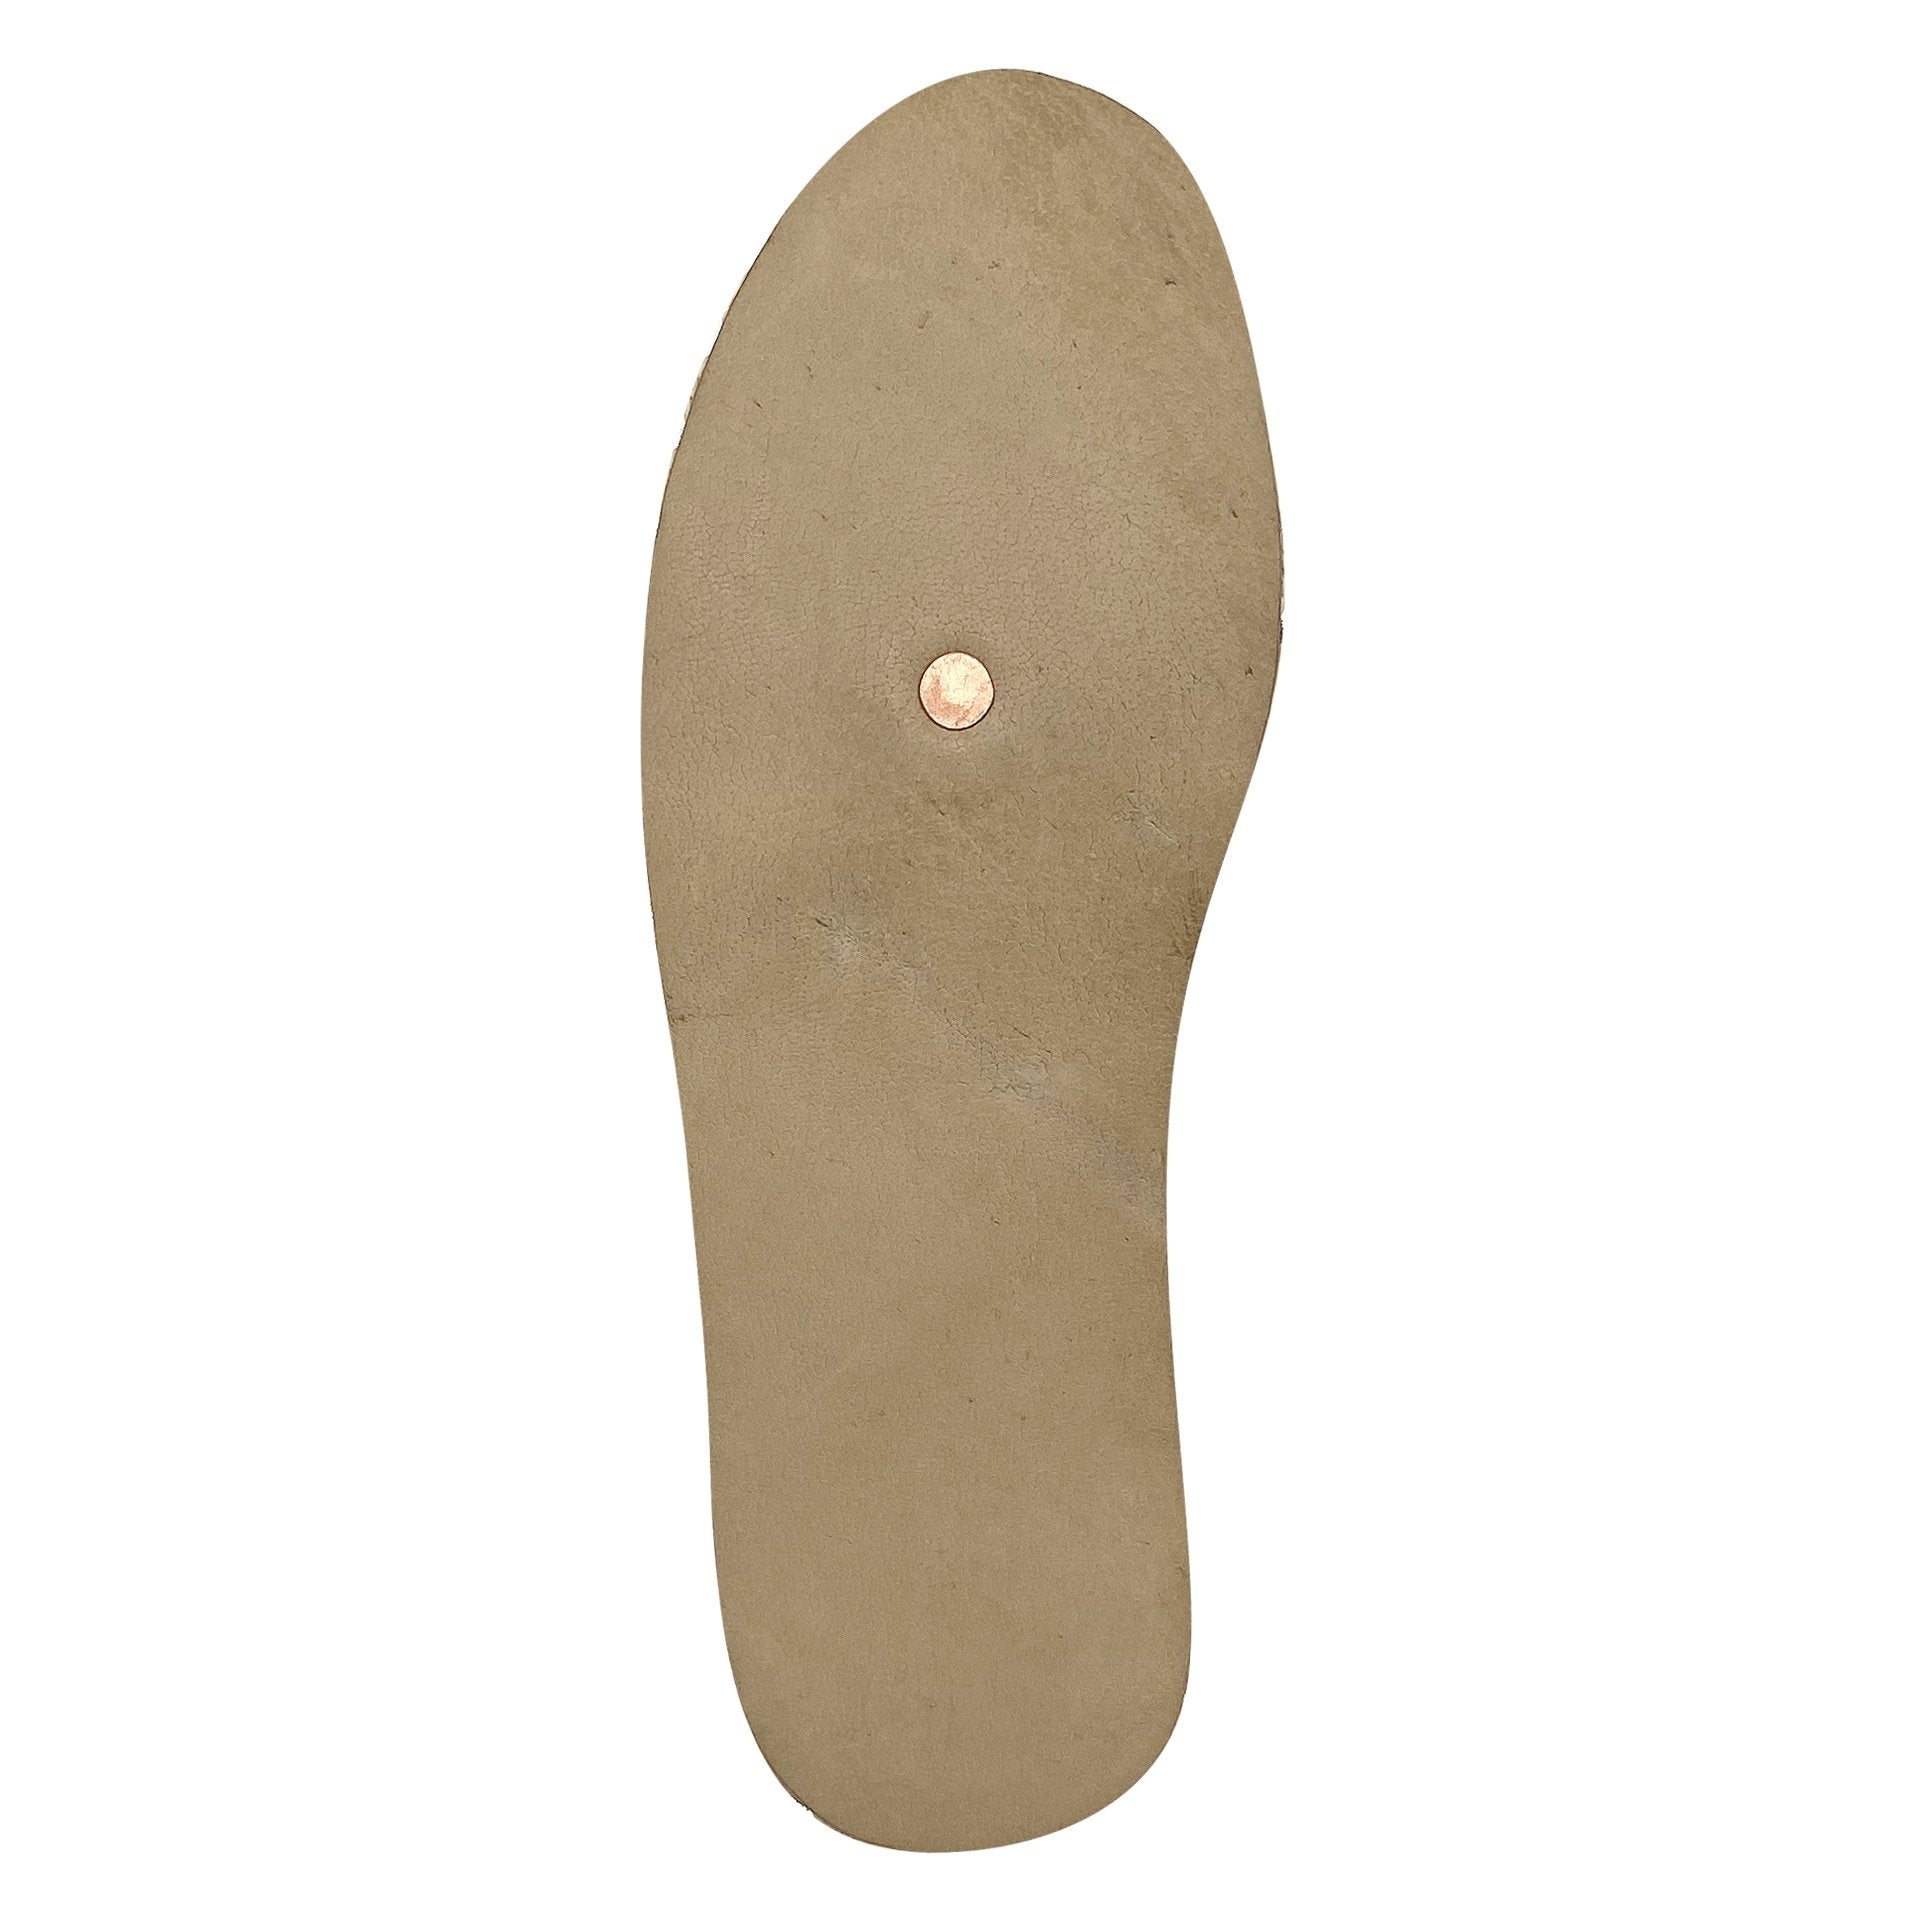 Men's Earthing Shoes with Copper Rivet (Final Clearance)